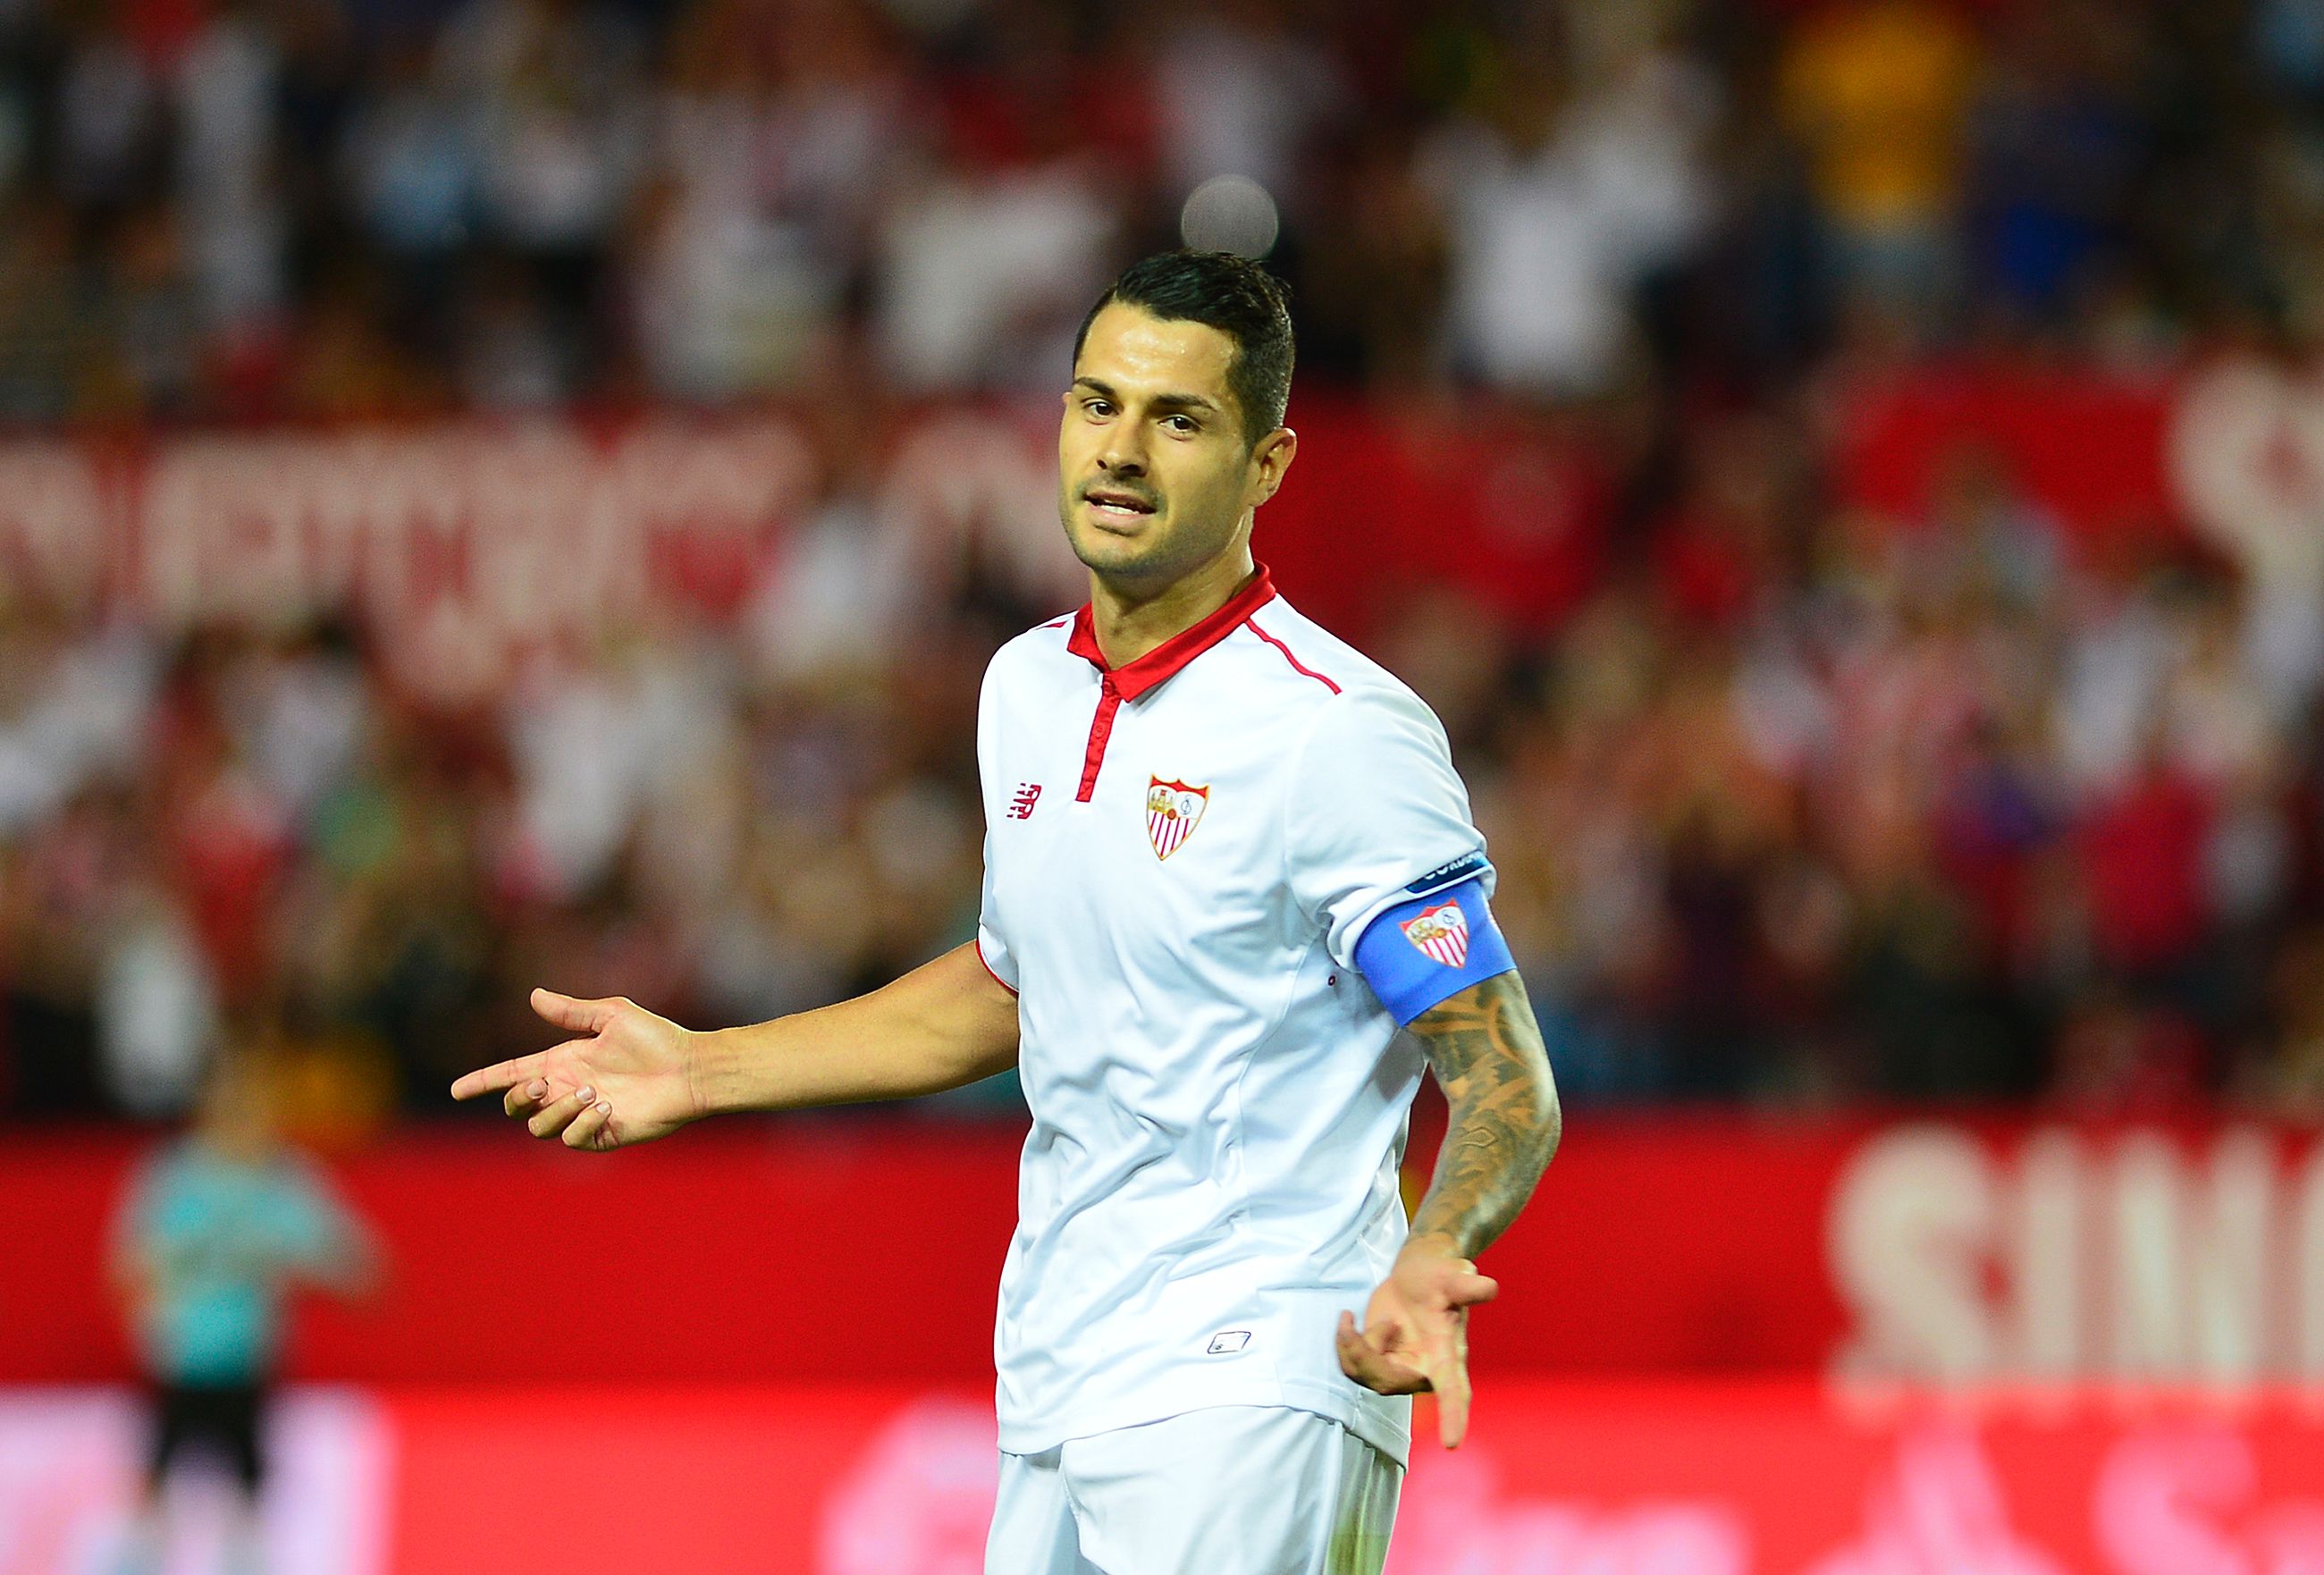 Sevilla's midfielder Vitolo celebrates after scoring a goal during the Spanish league football match Sevilla FC vs CA Osasuna at the Ramon Sanchez Pizjuan stadium in Sevilla on May 20, 2017. / AFP PHOTO / CRISTINA QUICLER        (Photo credit should read CRISTINA QUICLER/AFP/Getty Images)